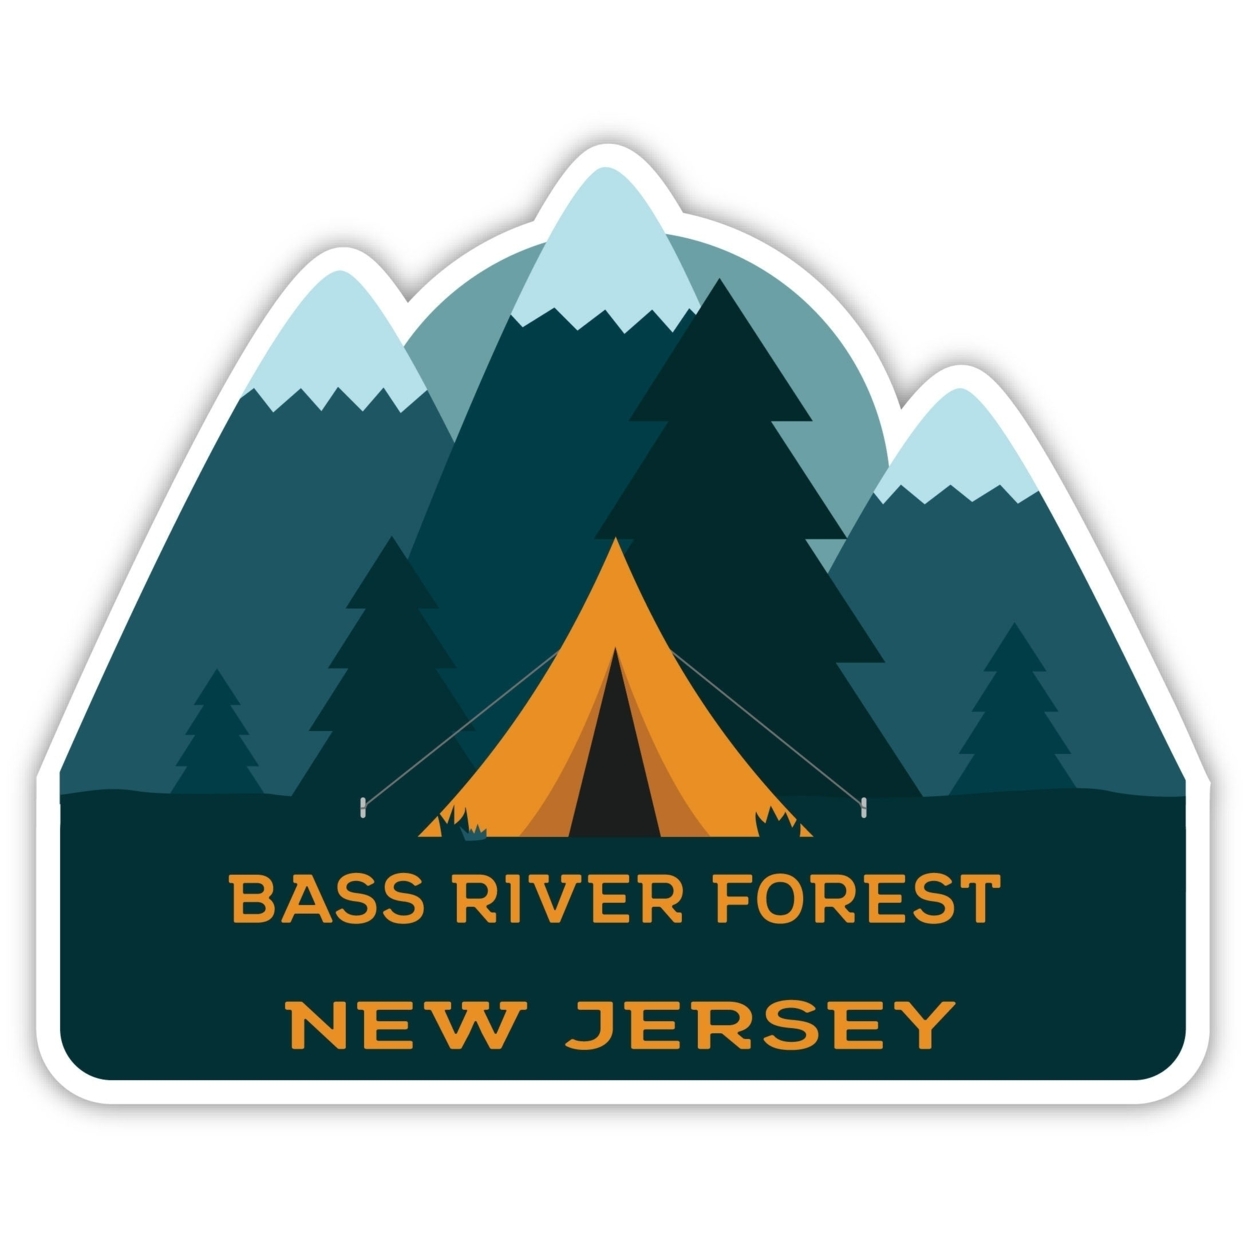 Bass River Forest New Jersey Souvenir Decorative Stickers (Choose Theme And Size) - Single Unit, 6-Inch, Tent